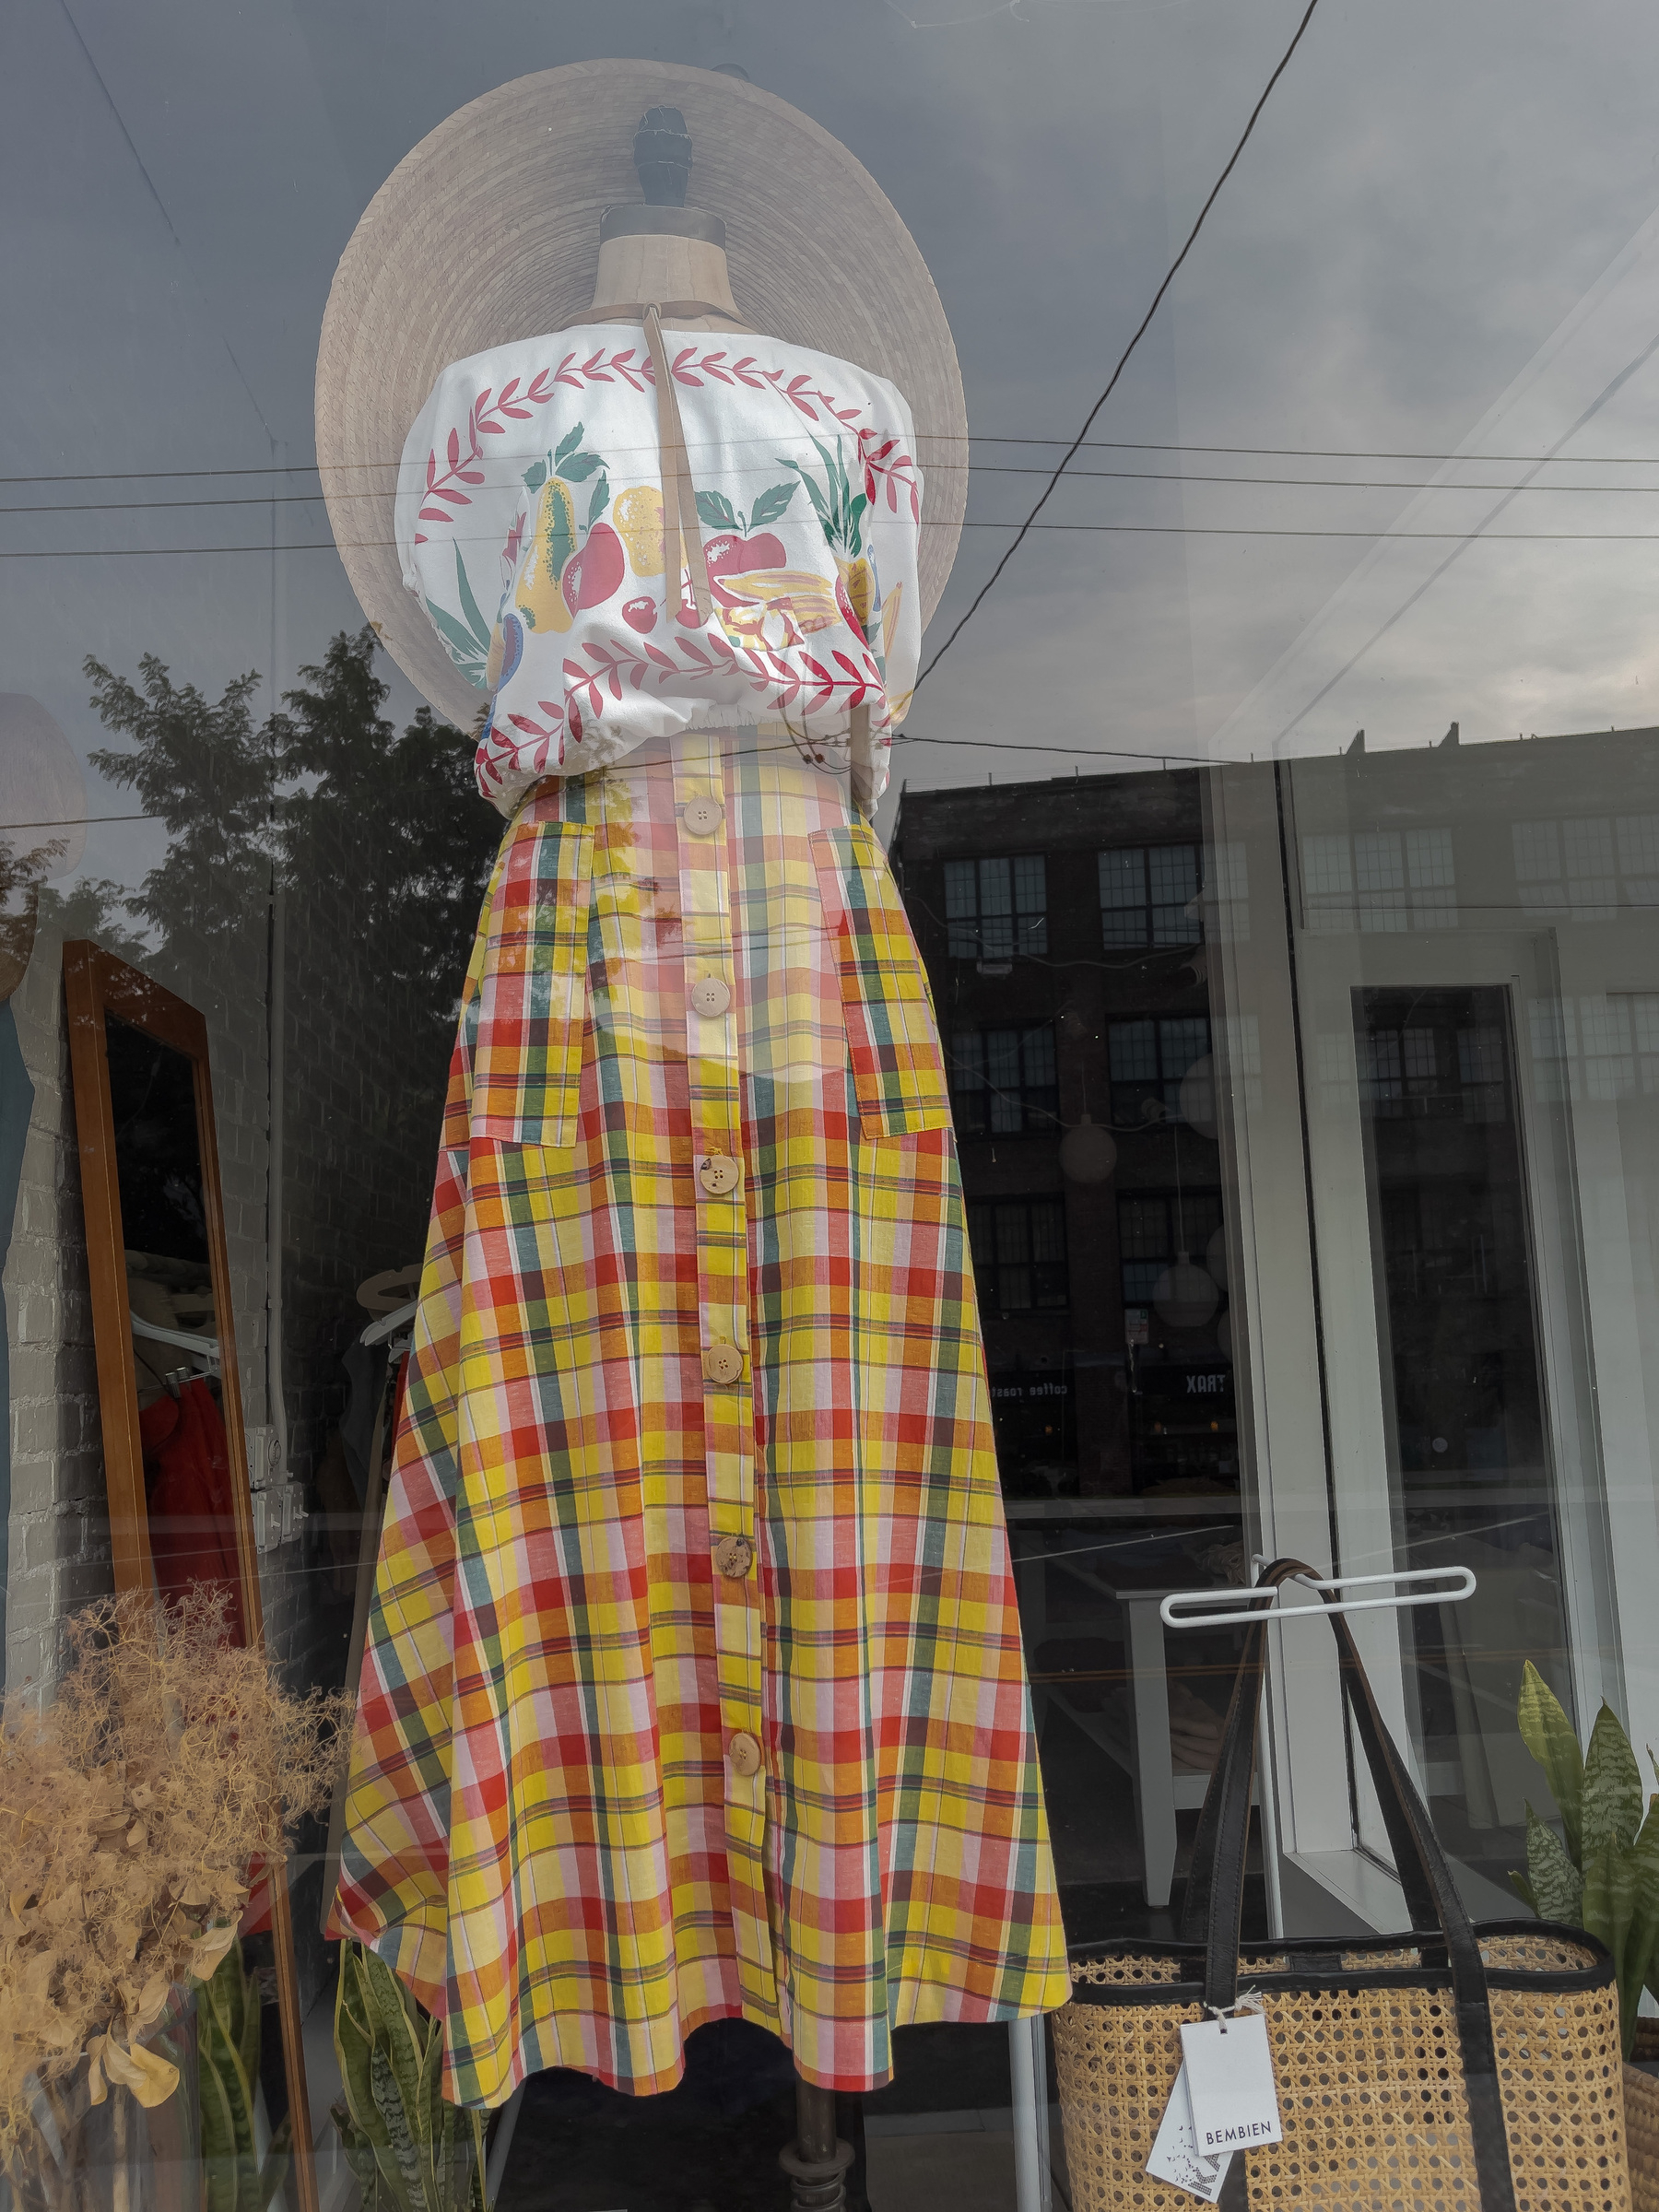 plaid skirt and peasant print blouse and large brimmed straw hat on mannequin form in shop window